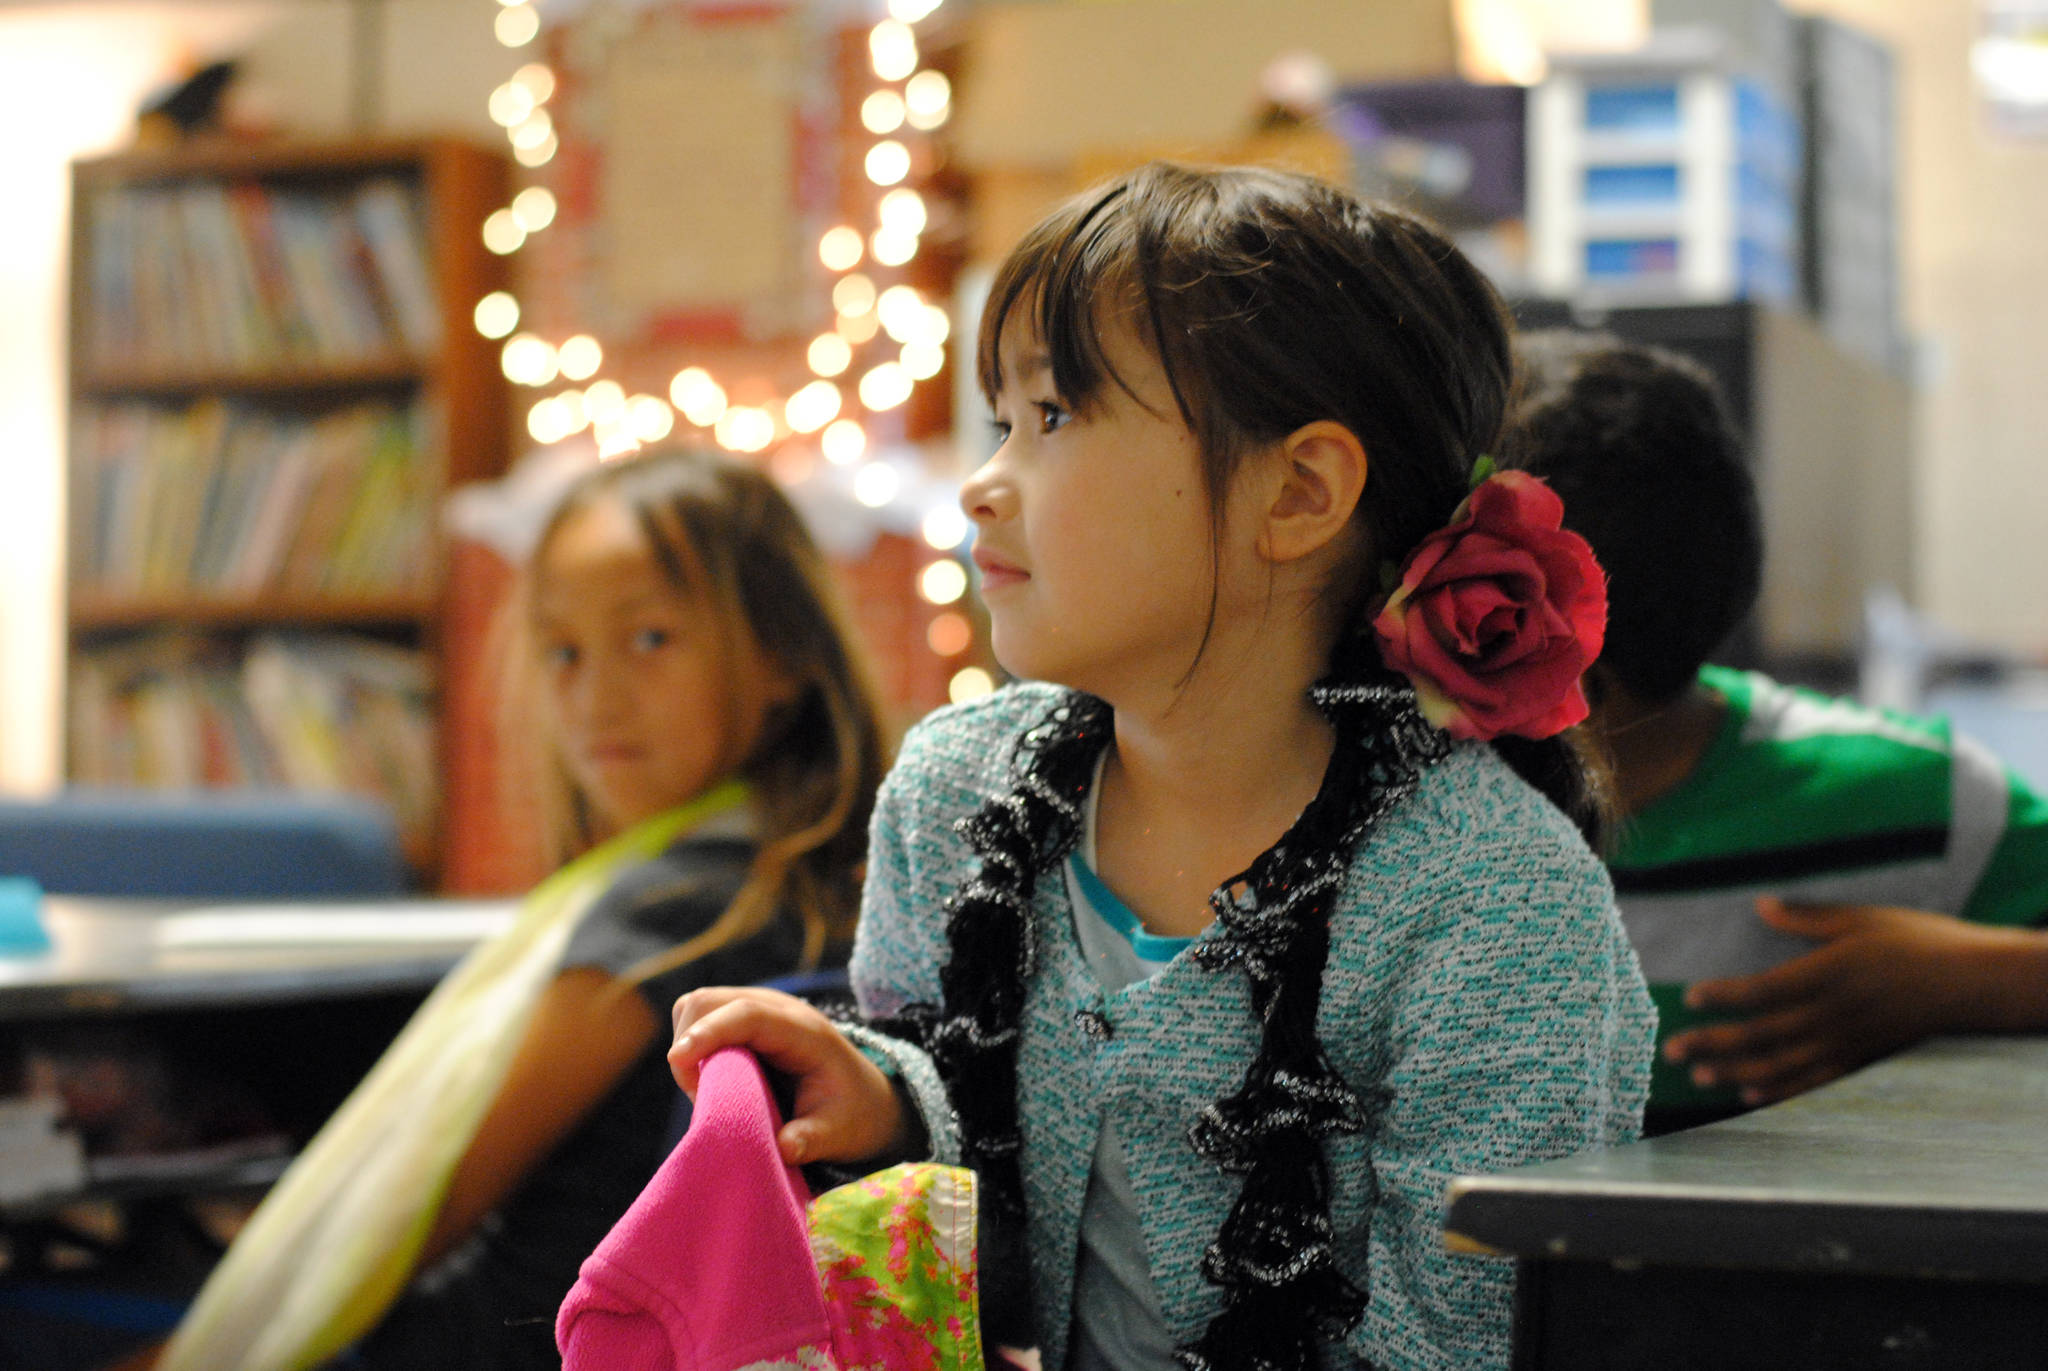 Third-grader Ruka Olson listens as her teacher, Tanya Erwin, details the expectations in the classroom for the year on the first day of school at Nikiski North Star Elementary School on Tuesday, Aug. 22, 2017 in Nikiski, Alaska. (Photo by Kat Sorensen/Peninsula Clarion)